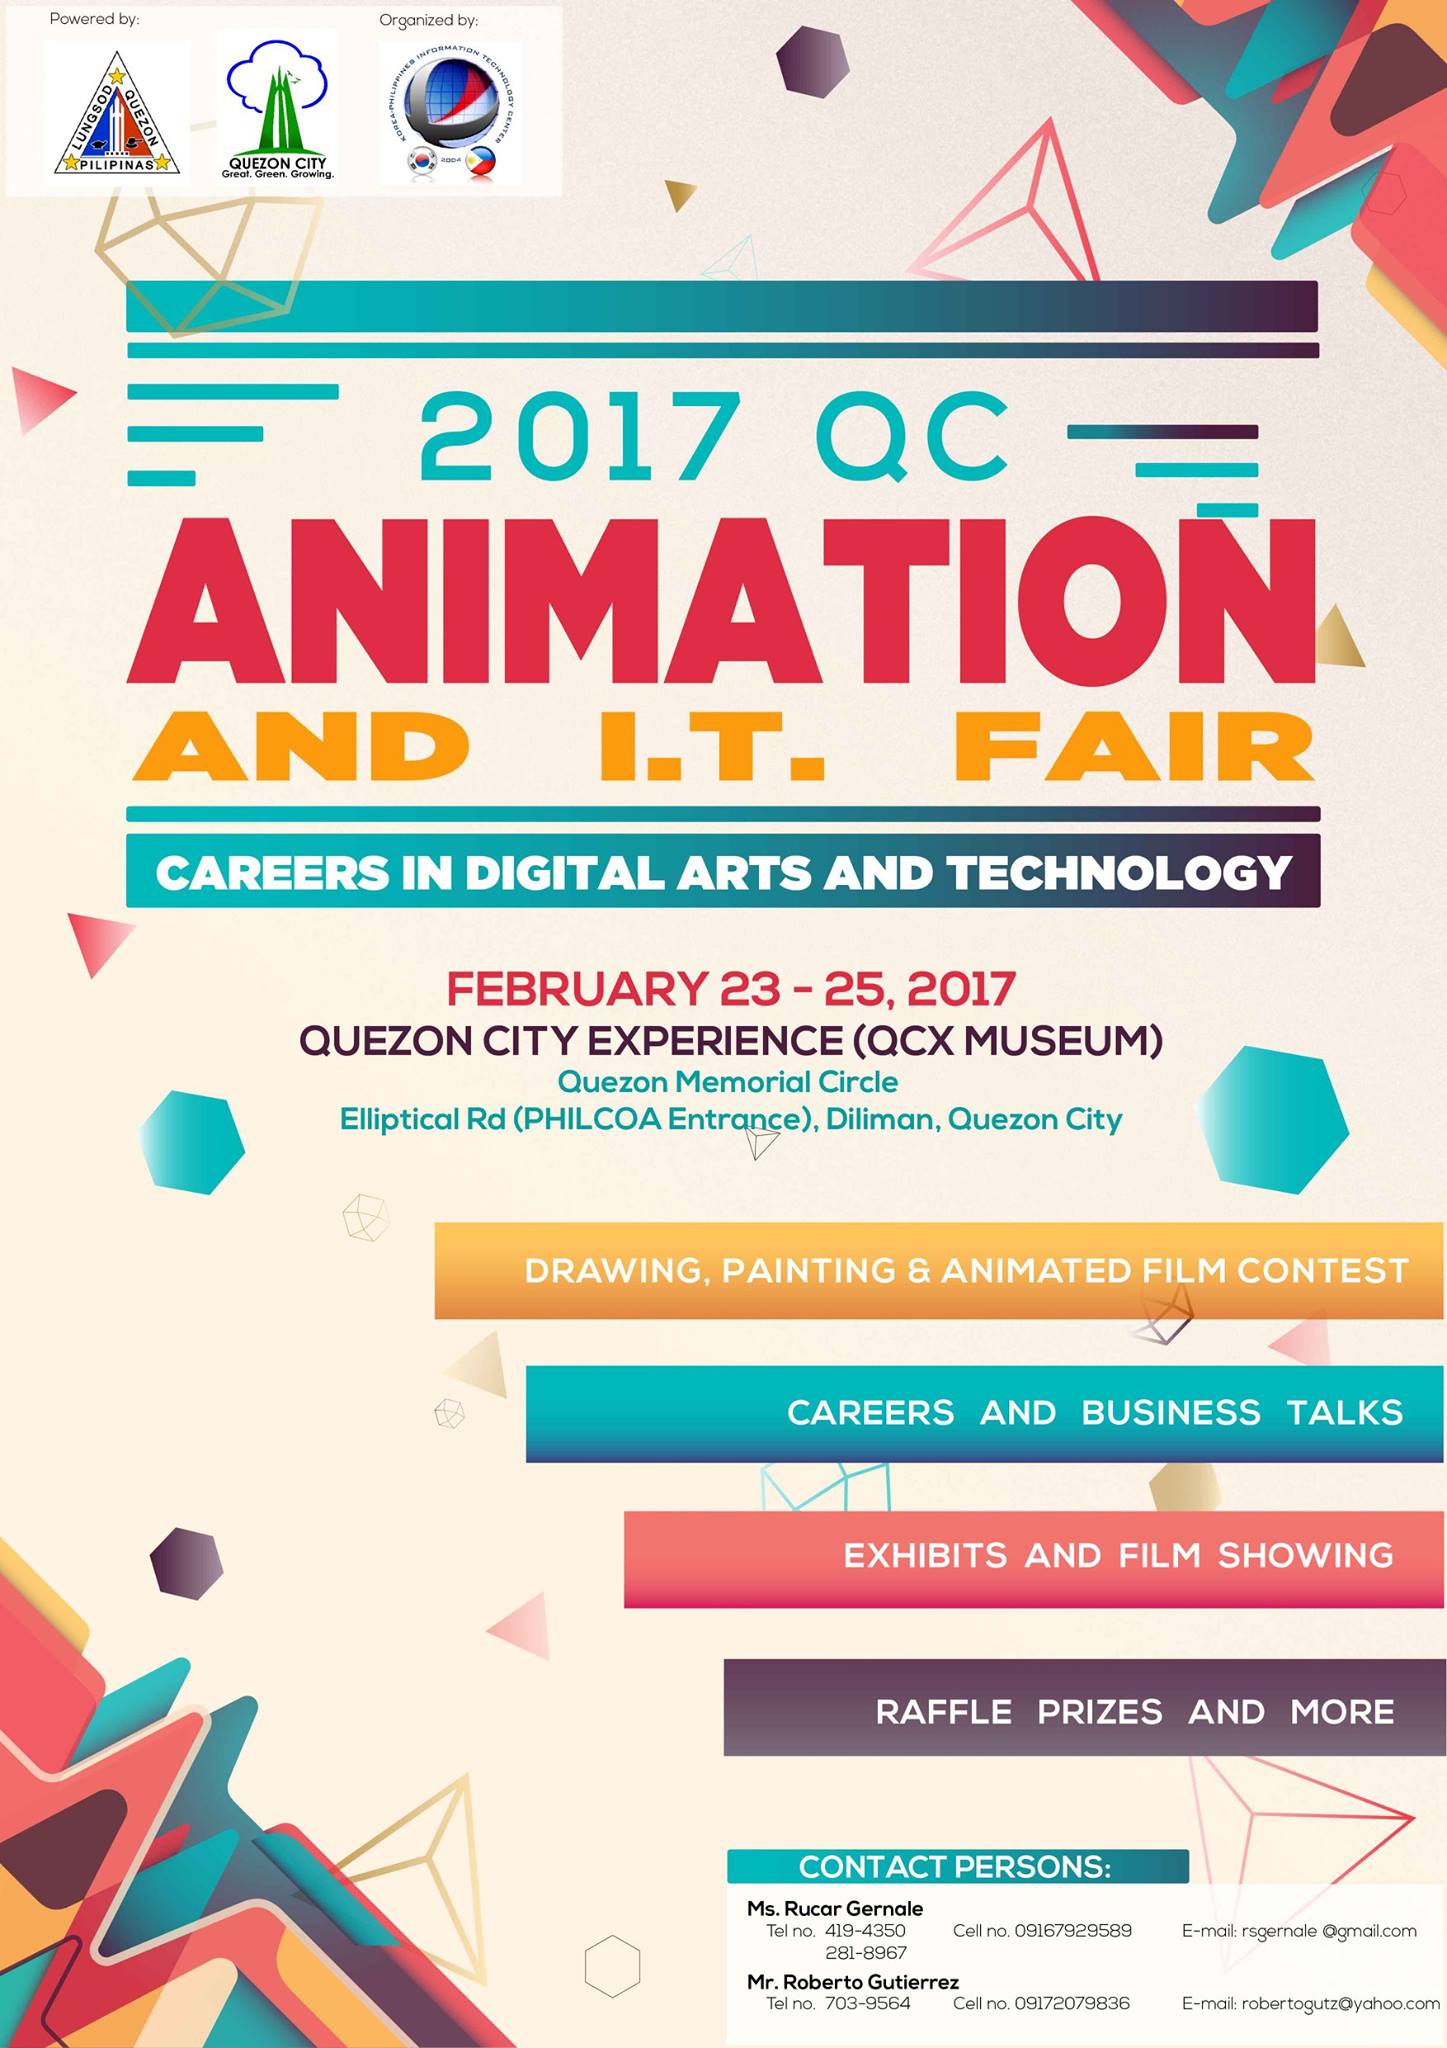 2017 QC Animation and I. T. Fair clock February 23 – February 25 Feb 23 at 9 AM to Feb 25 at 5 PM pin Show Map QCX Museum Quezon City Memorial Circle, Quezon City, Philippines ticket Find Tickets Tickets Available goo.gl About Discussion Details The event theme "Careers in Digital Arts and Technology" aims to promote awareness and stimulate interest in career opportunities in 3D Animation. The event showcases animation, IT exhibits, open forum, lectures/talks (free and paid topics), film showings, virtual reality demos, on the spot drawing contest, digital painting and a museum tour experience. The citywide event is expected to be participated by educators, parents, students from private and public institutions, and industry professionals, entrepreneurs. The event will be promoted citywide. We are providing registration forms and entrance tickets or you may go to our website at www.quezoncitykorphil.com. (Registration fees will be Php 100. Discounted rates of Php 80 applicable for People with Disability, Students and Senior Citizen). For our interested EXHIBITOR please click here to register: https://goo.gl/forms/mDir3Bze3x0pyTOe2 ​ For our interested participants in ON-THE-SPOT SPEED DIGITAL PAINTING CONTEST Please click here to register: https://goo.gl/forms/LjDwIIB3p6oK1Gsa2 ​ For our interested participants in EXPERIMENTAL ANIMATION SHORT FILM CHALLENGE Please click here to register: https://goo.gl/forms/a0uNrp03fOTFkmqI2 ​ To all High School students interested participants in ON THE SPOT DRAWING CONTEST Please click here to register: https://goo.gl/forms/NYhdRThLVnheja272 For more information, kindly contact Ms. Rucar Gernale or Mr. Rupil Briones, event coordinators, Tel Nos. 359-9199 and 703-9564. KPITTC is the city government’s IT training center pursuing 2D, 3D animation and IT courses to the educational sector ----- Korea Philippines Information Technology Training C